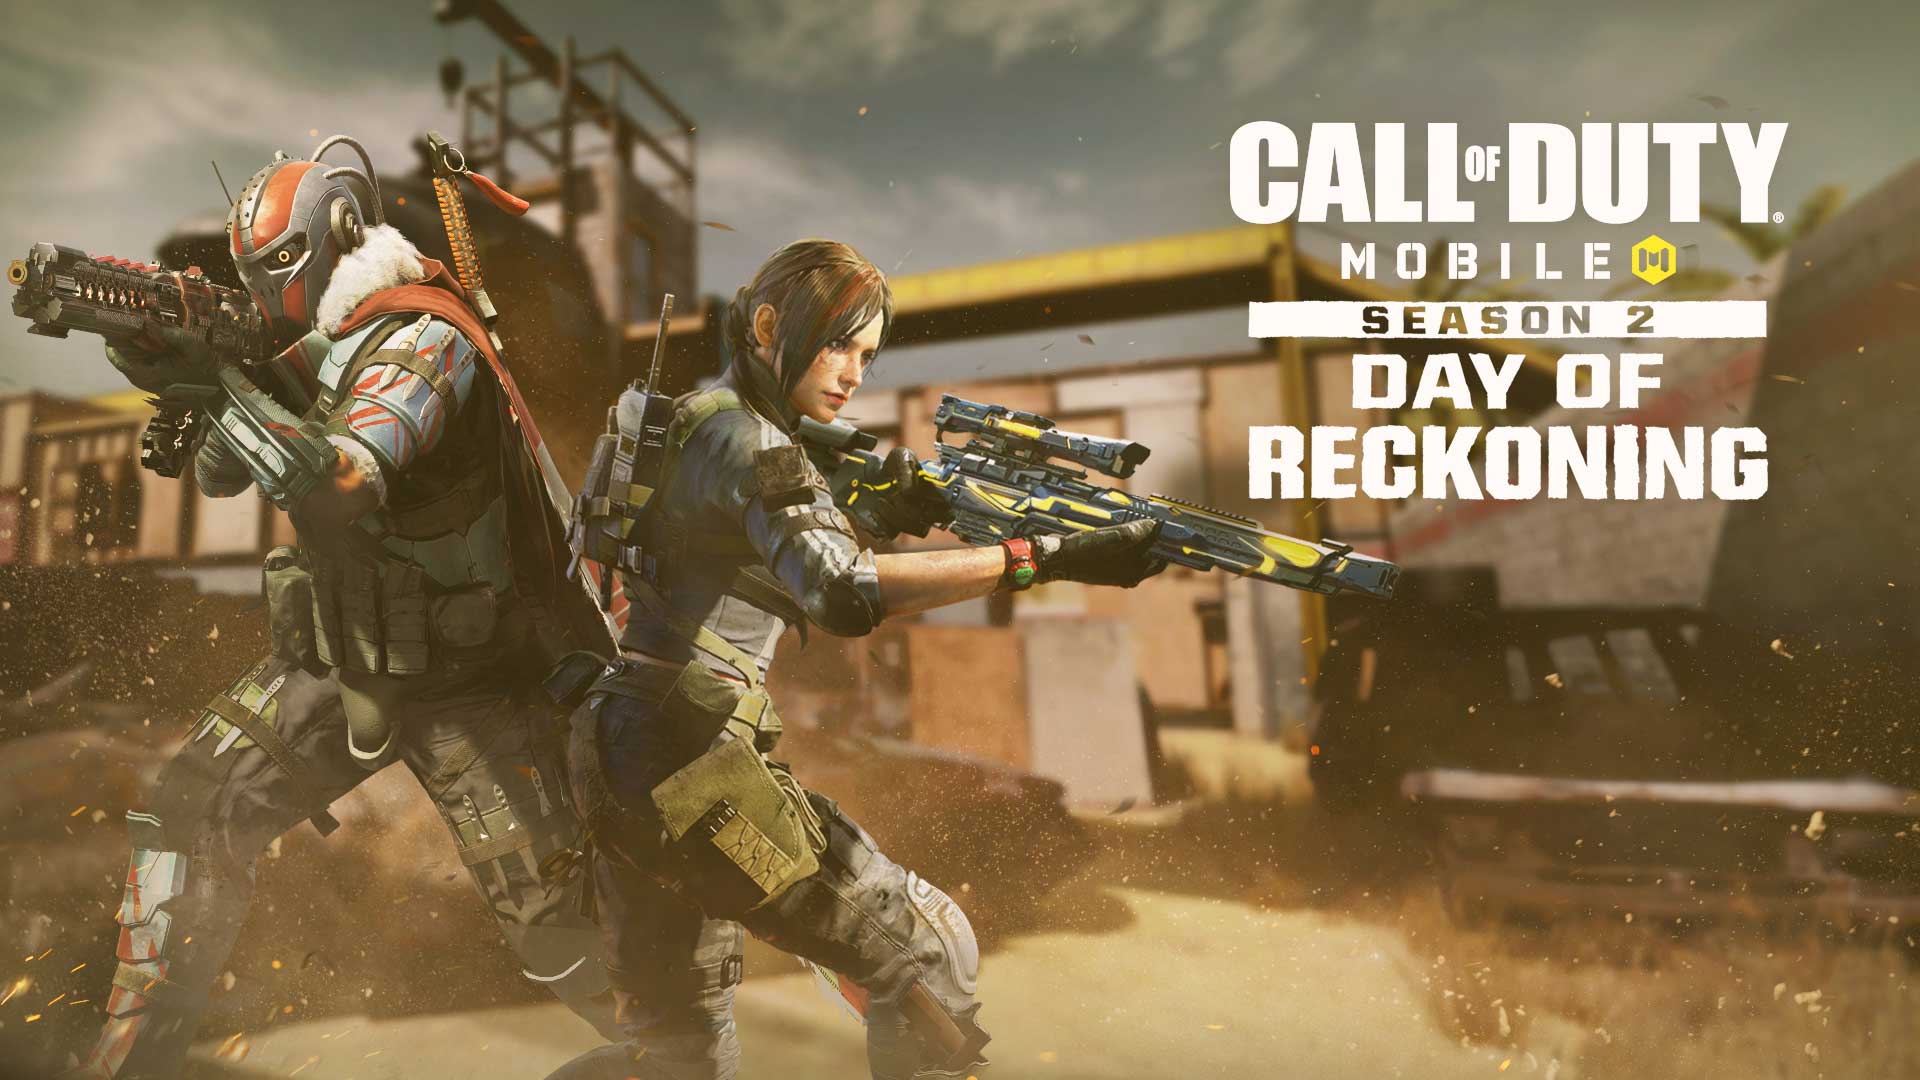 Call of Duty Mobile Season 2: Day of Reckoning